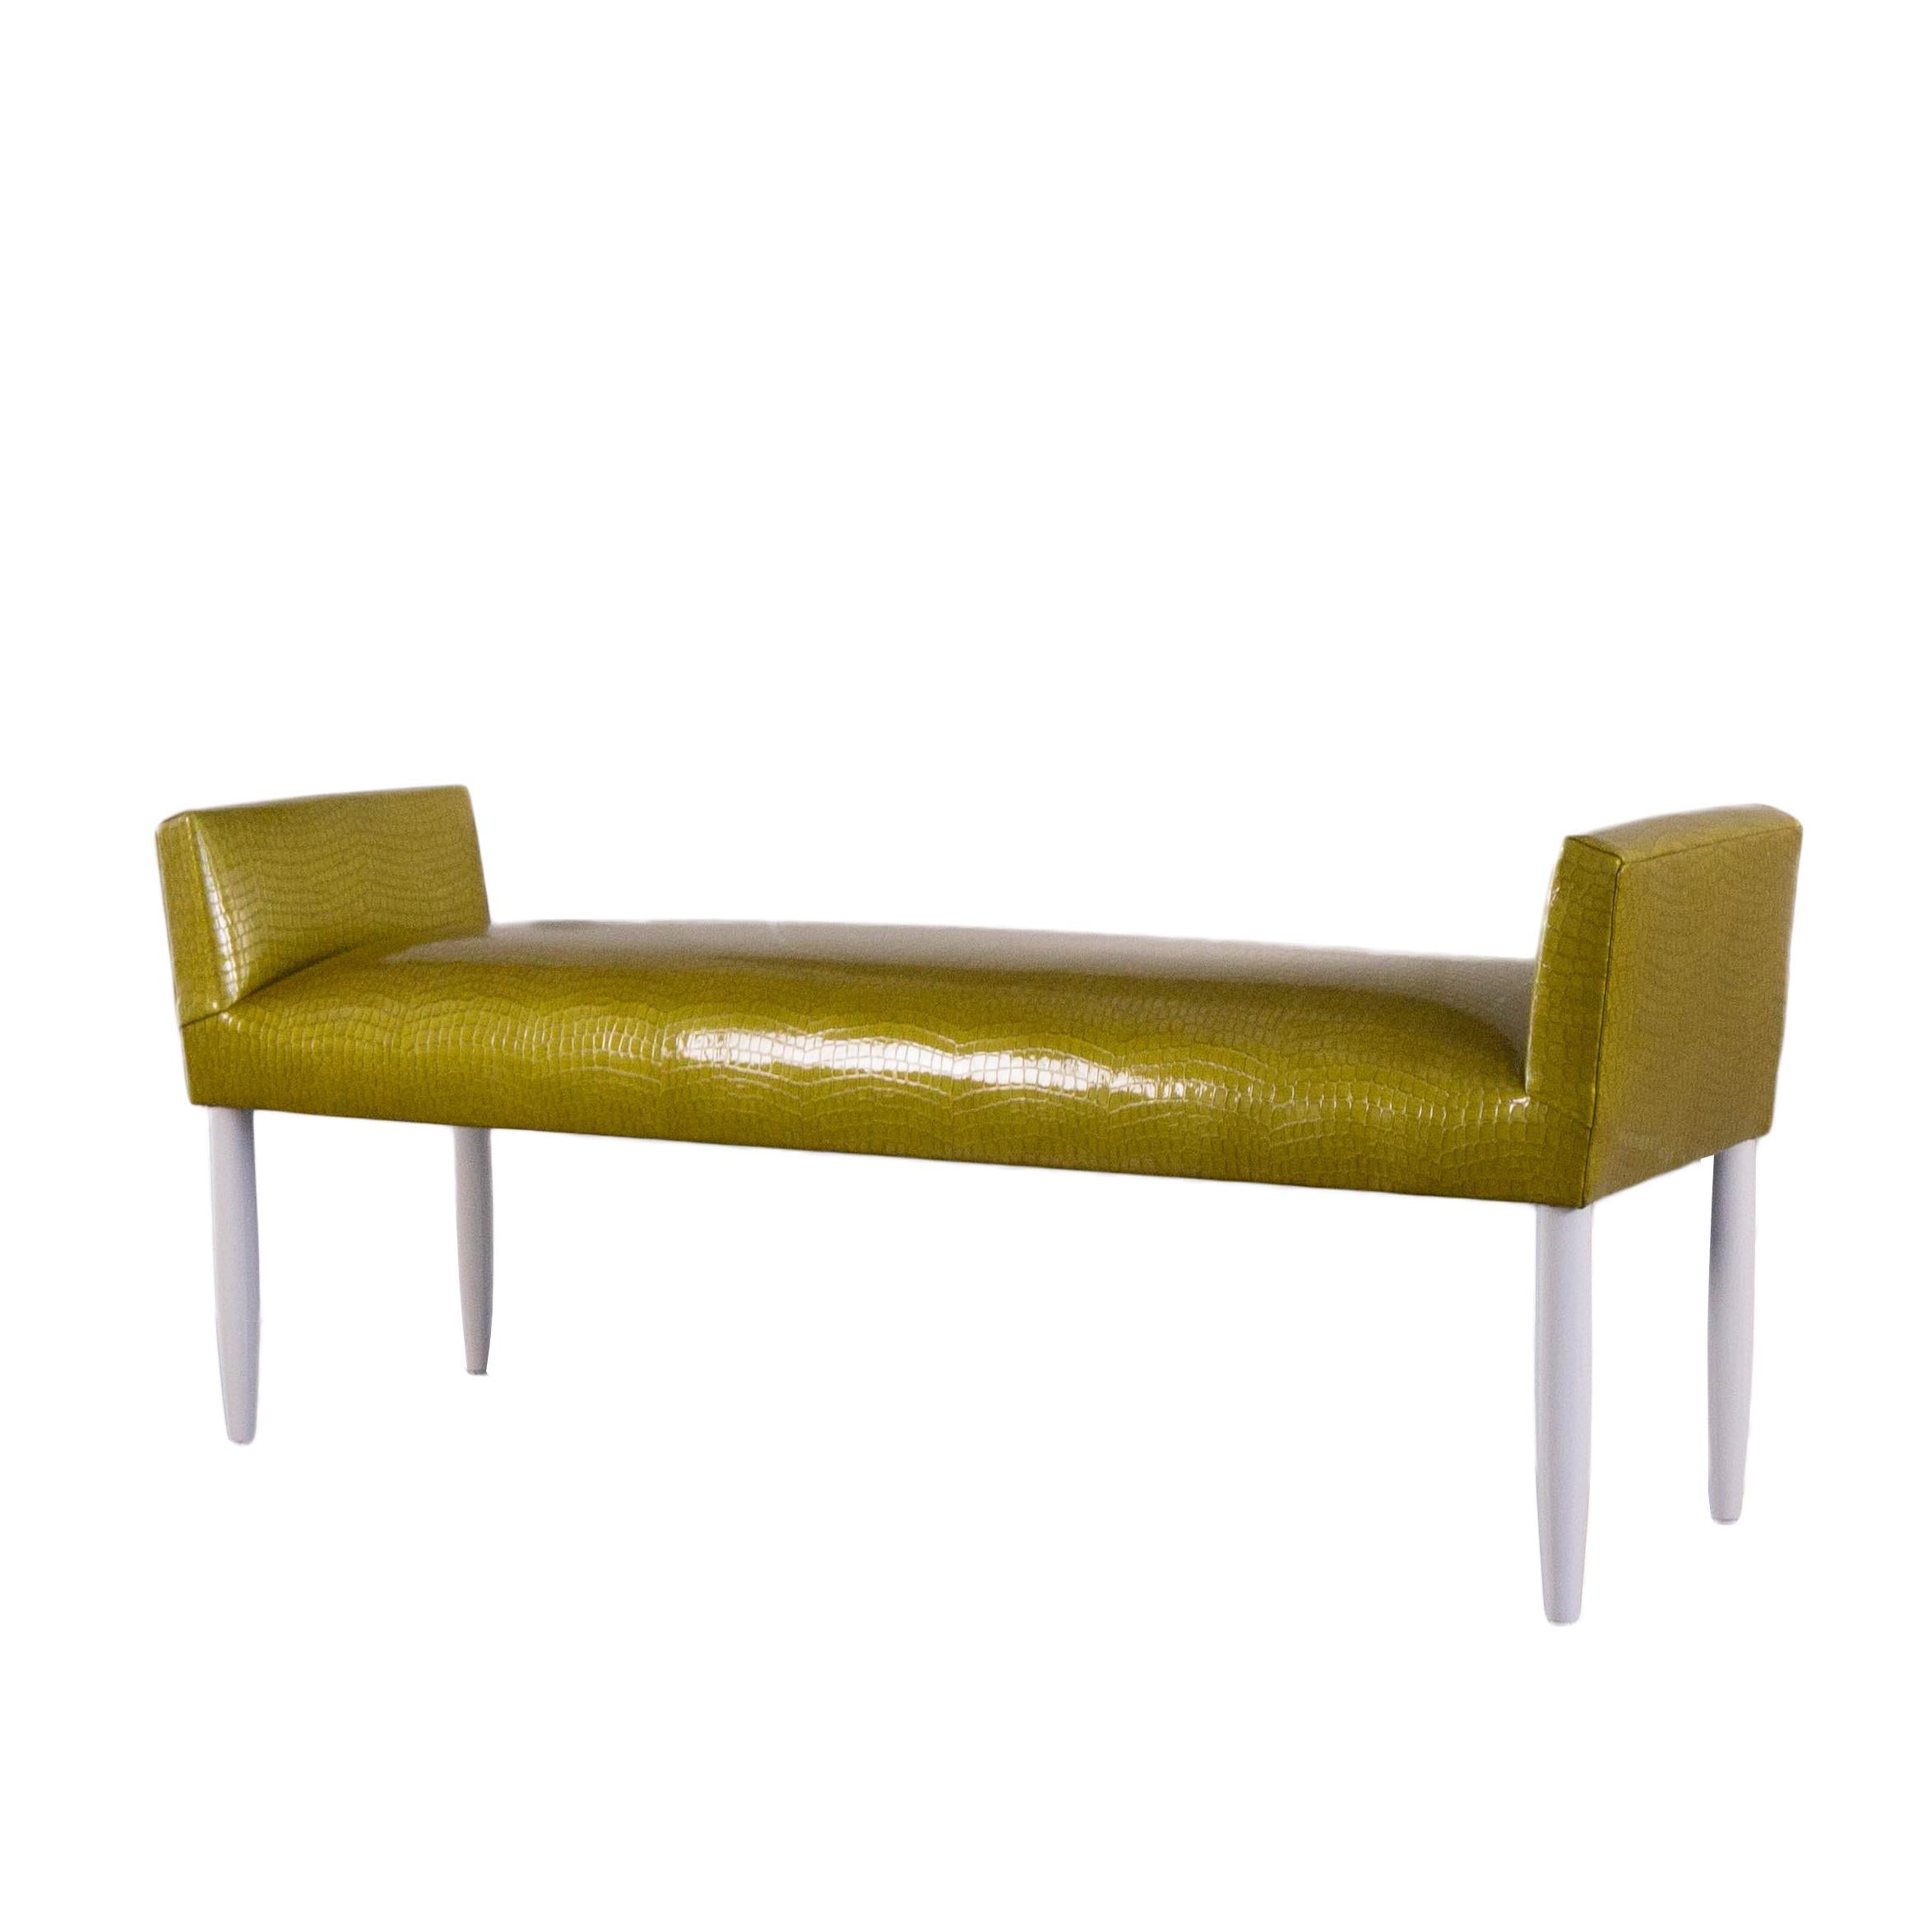 Inspired by Mid-Century Modern furniture, this tight cushioned accent bench is built to order and completely customizable. The bench shown was custom made featuring a green textured vinyl with a Mid-Century Modern tapered legs style painted in white